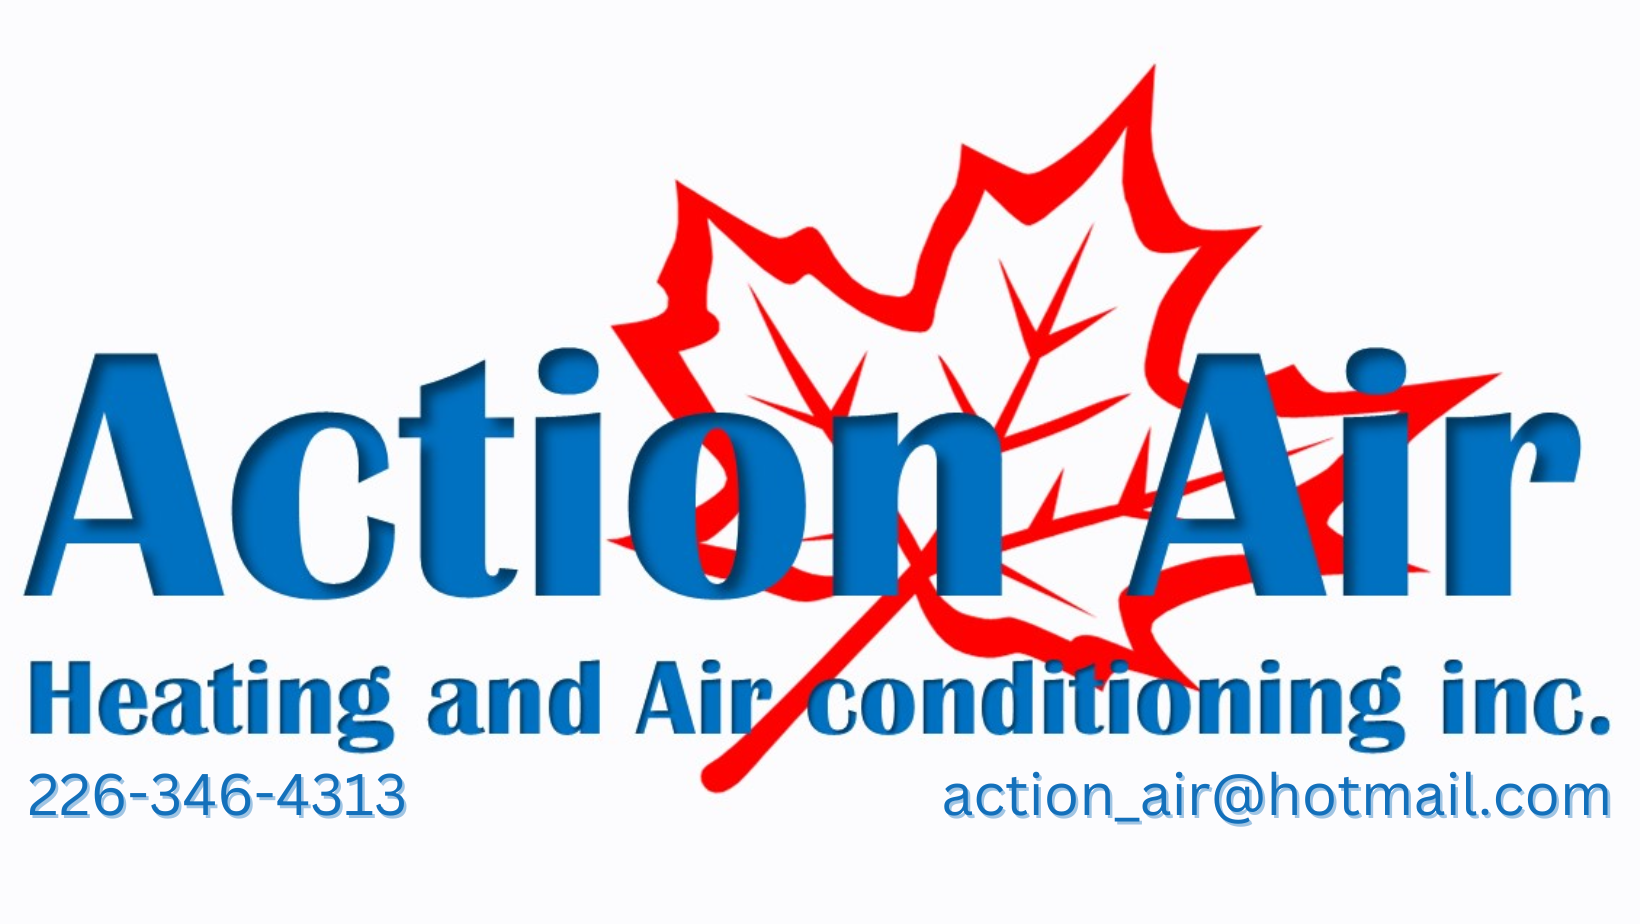 Action Air